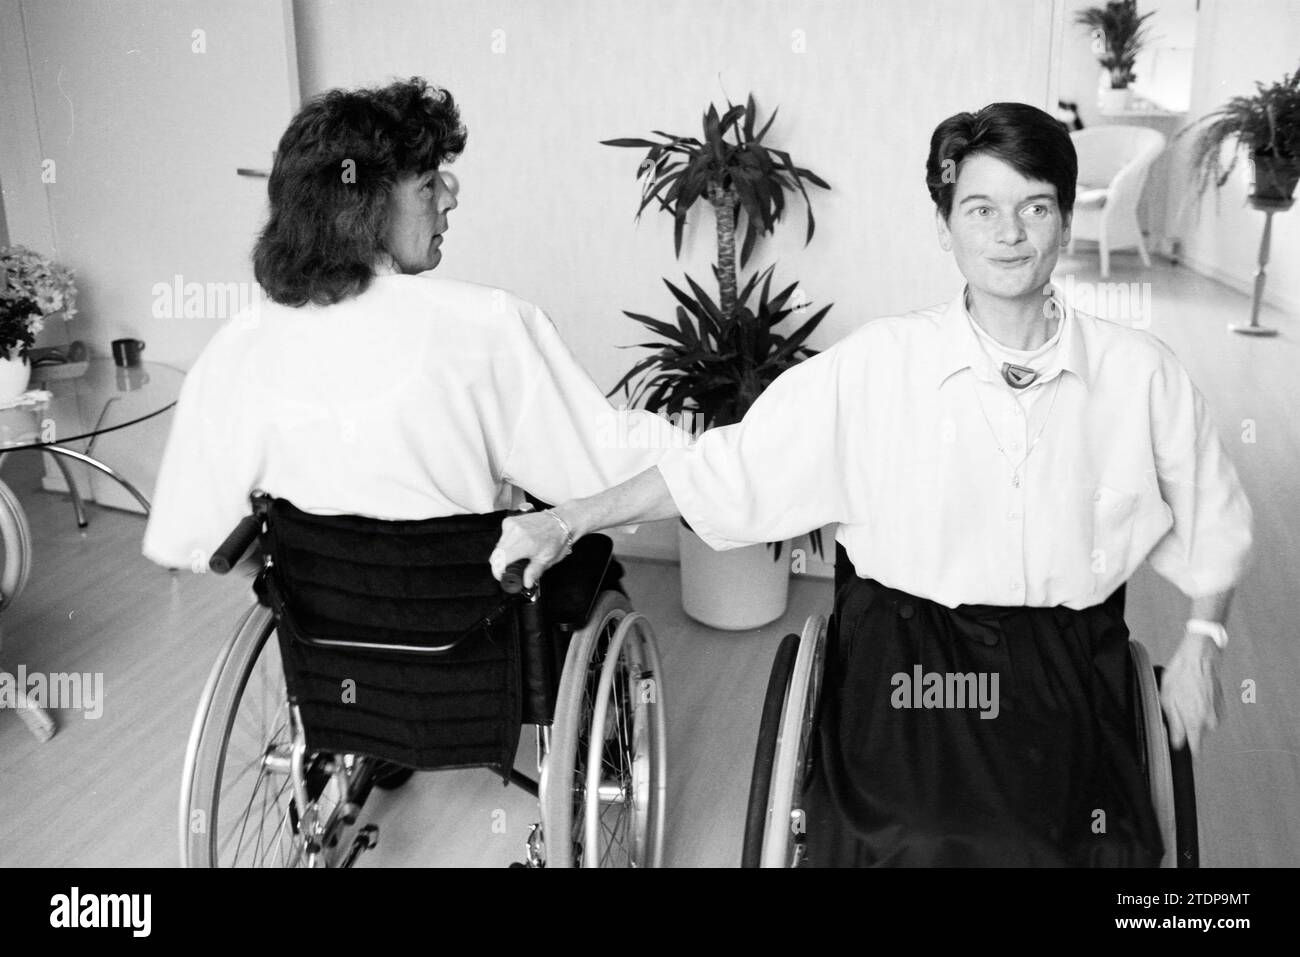 Mrs. E. Aarsen, Ned. wheelchair dancing championships, 13-04-1993, Whizgle News from the Past, Tailored for the Future. Explore historical narratives, Dutch The Netherlands agency image with a modern perspective, bridging the gap between yesterday's events and tomorrow's insights. A timeless journey shaping the stories that shape our future Stock Photo